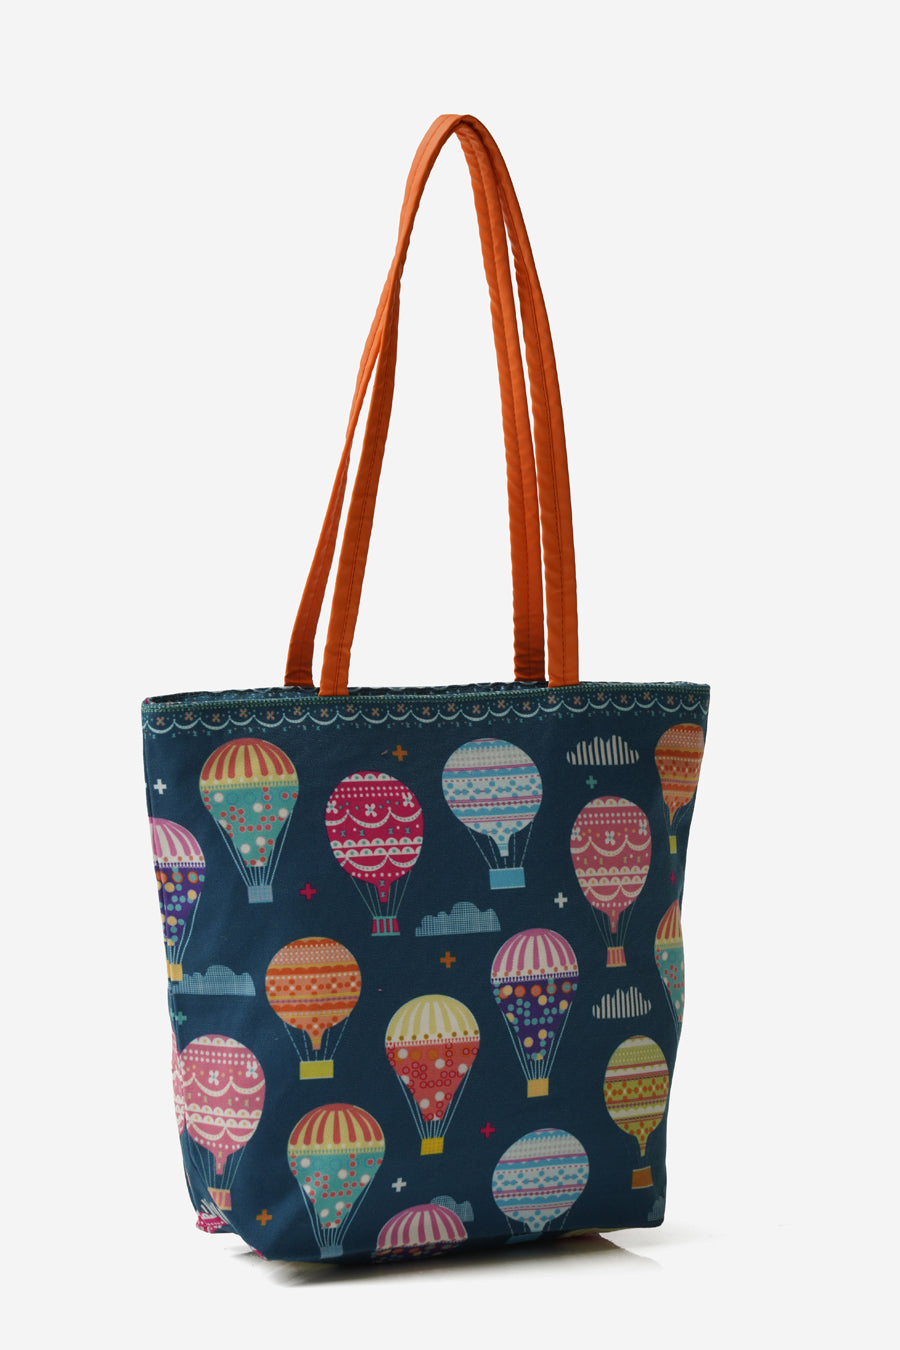 High on Happiness Shoulder Tote Bag with Vegan Leather